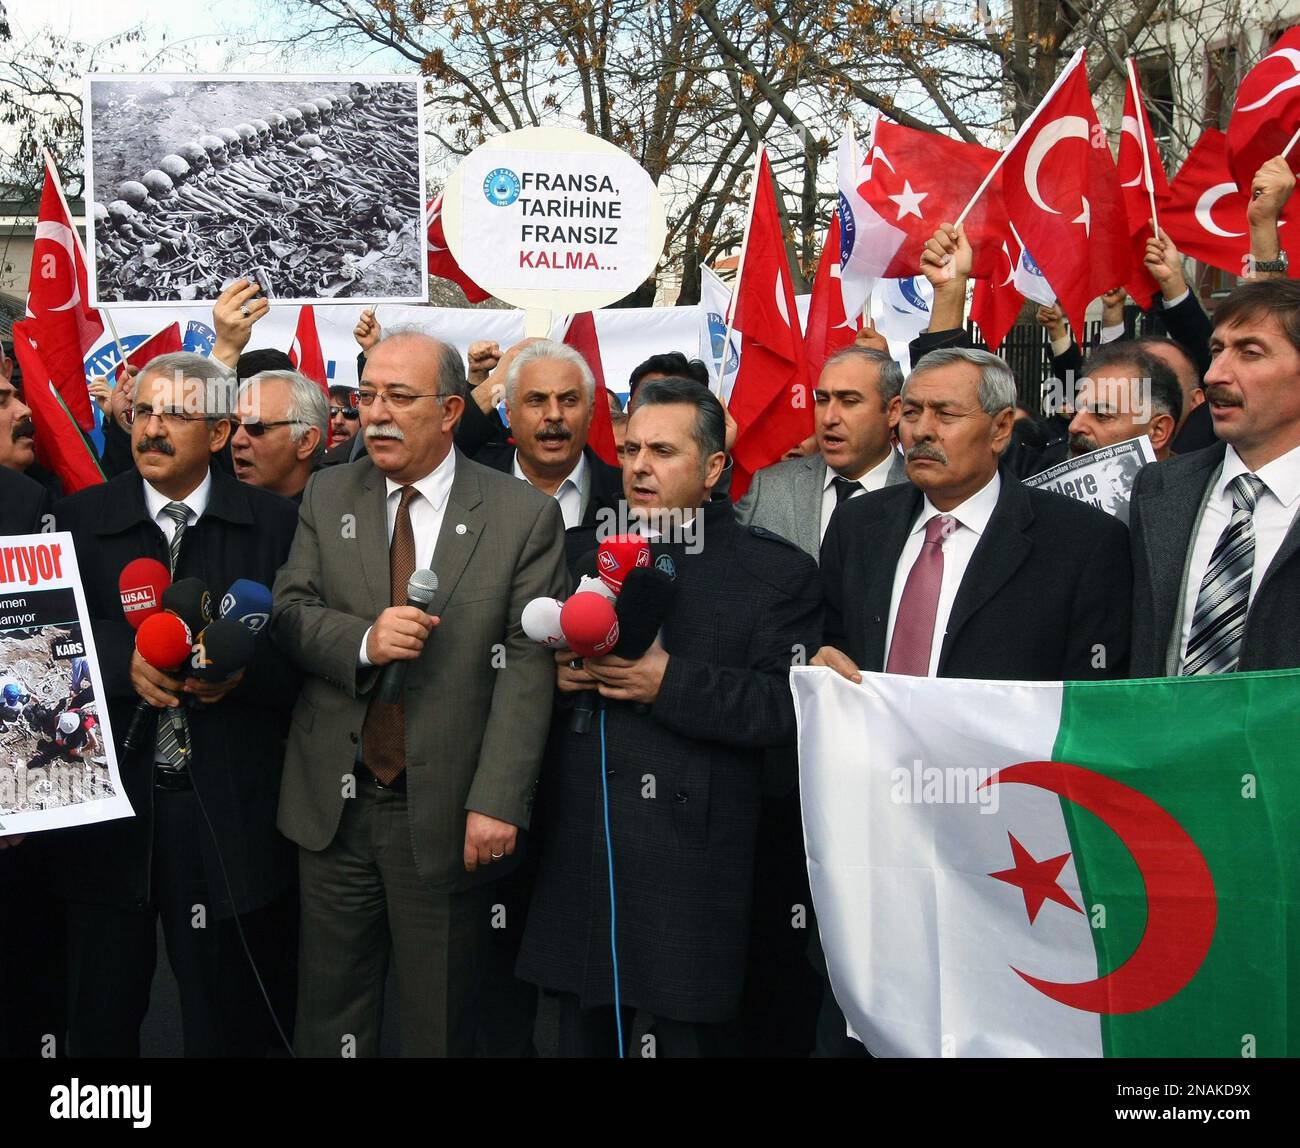 Members of a Turkish union hold Turkish and Algerian flags as they protest  against France outside the French Embassy in Ankara, Turkey, Thursday, Dec.  22, 2011. Turkey is recalling its ambassador to